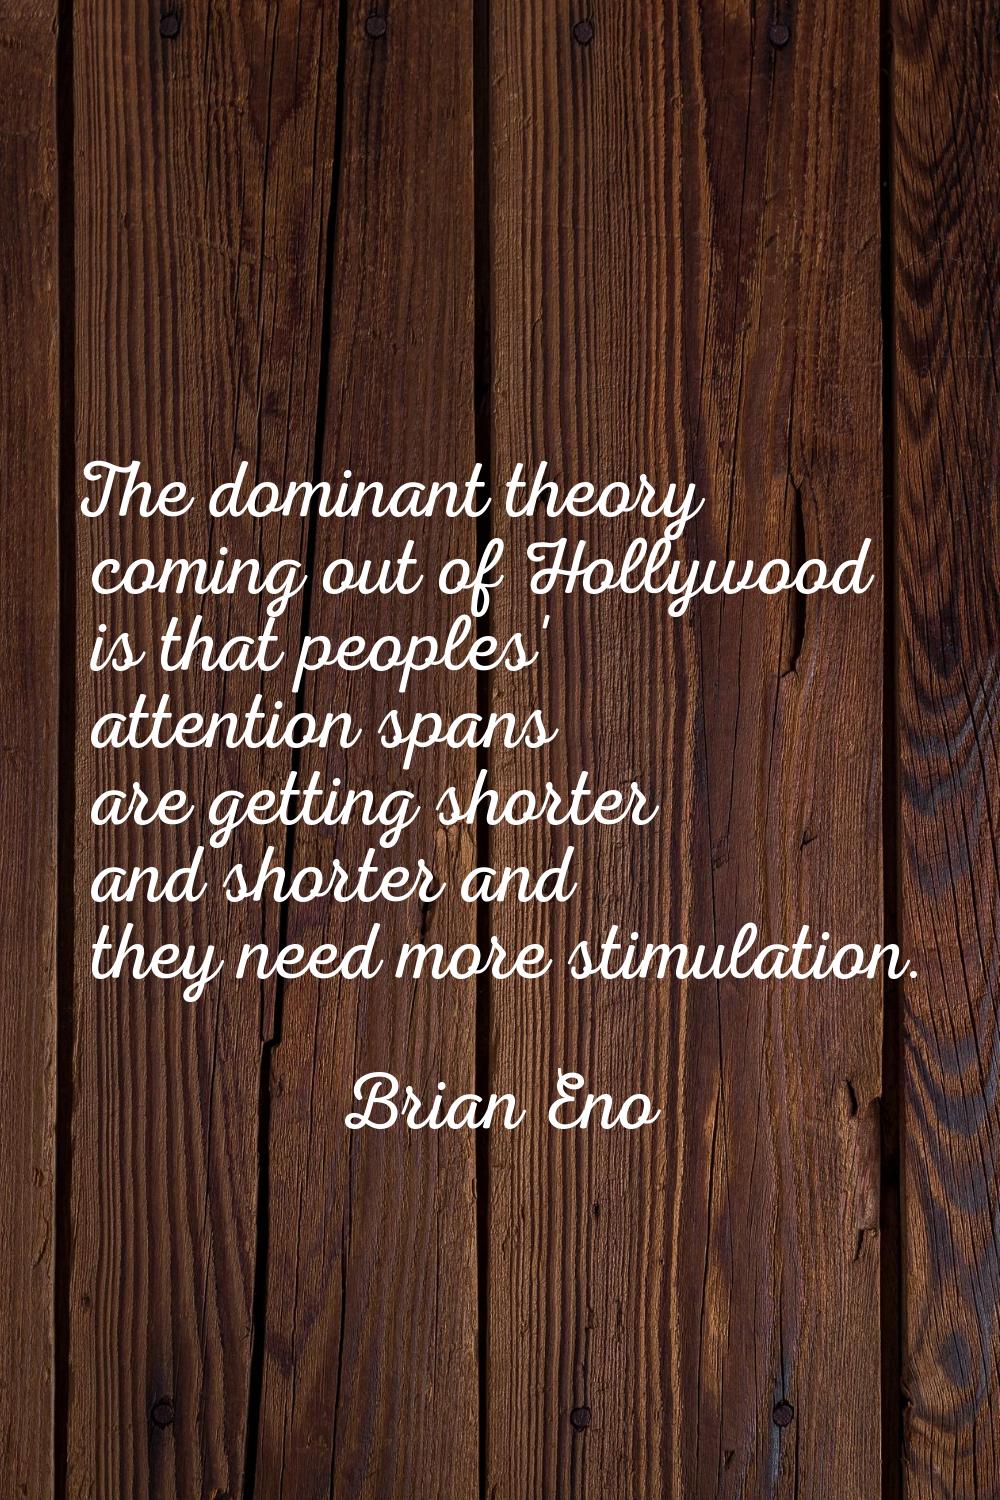 The dominant theory coming out of Hollywood is that peoples' attention spans are getting shorter an